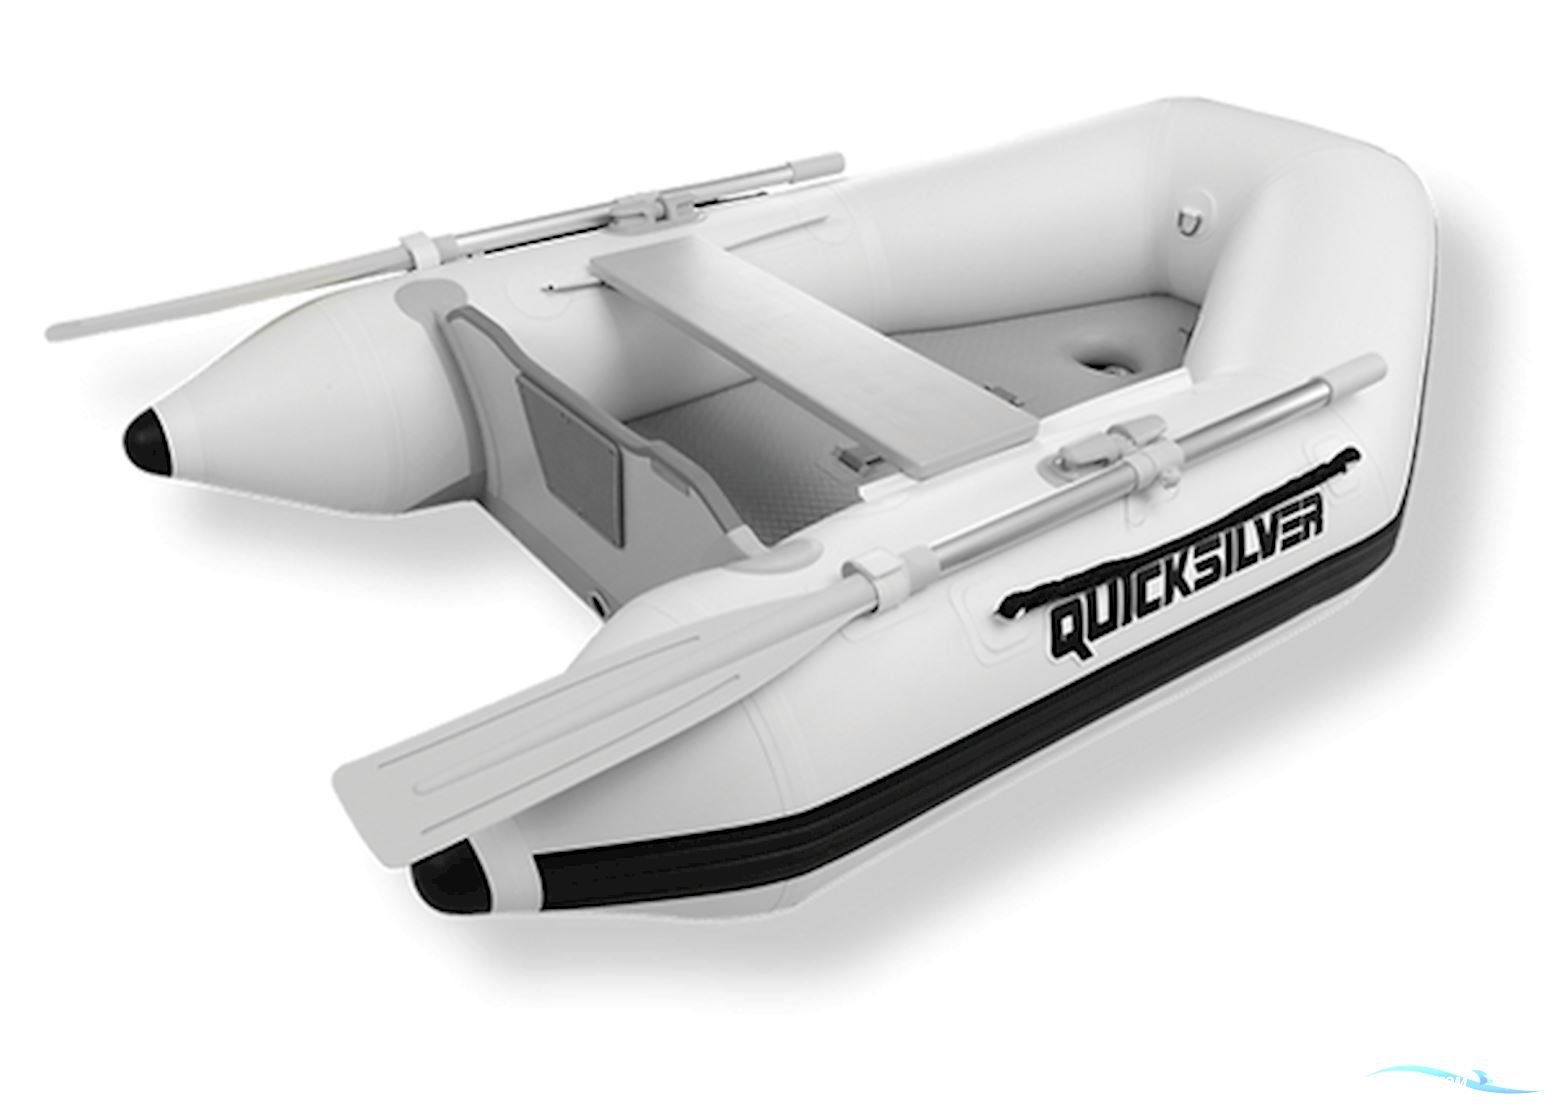 Quicksilver 200 Tendy Luftboden Inflatable / Rib 2023, Germany